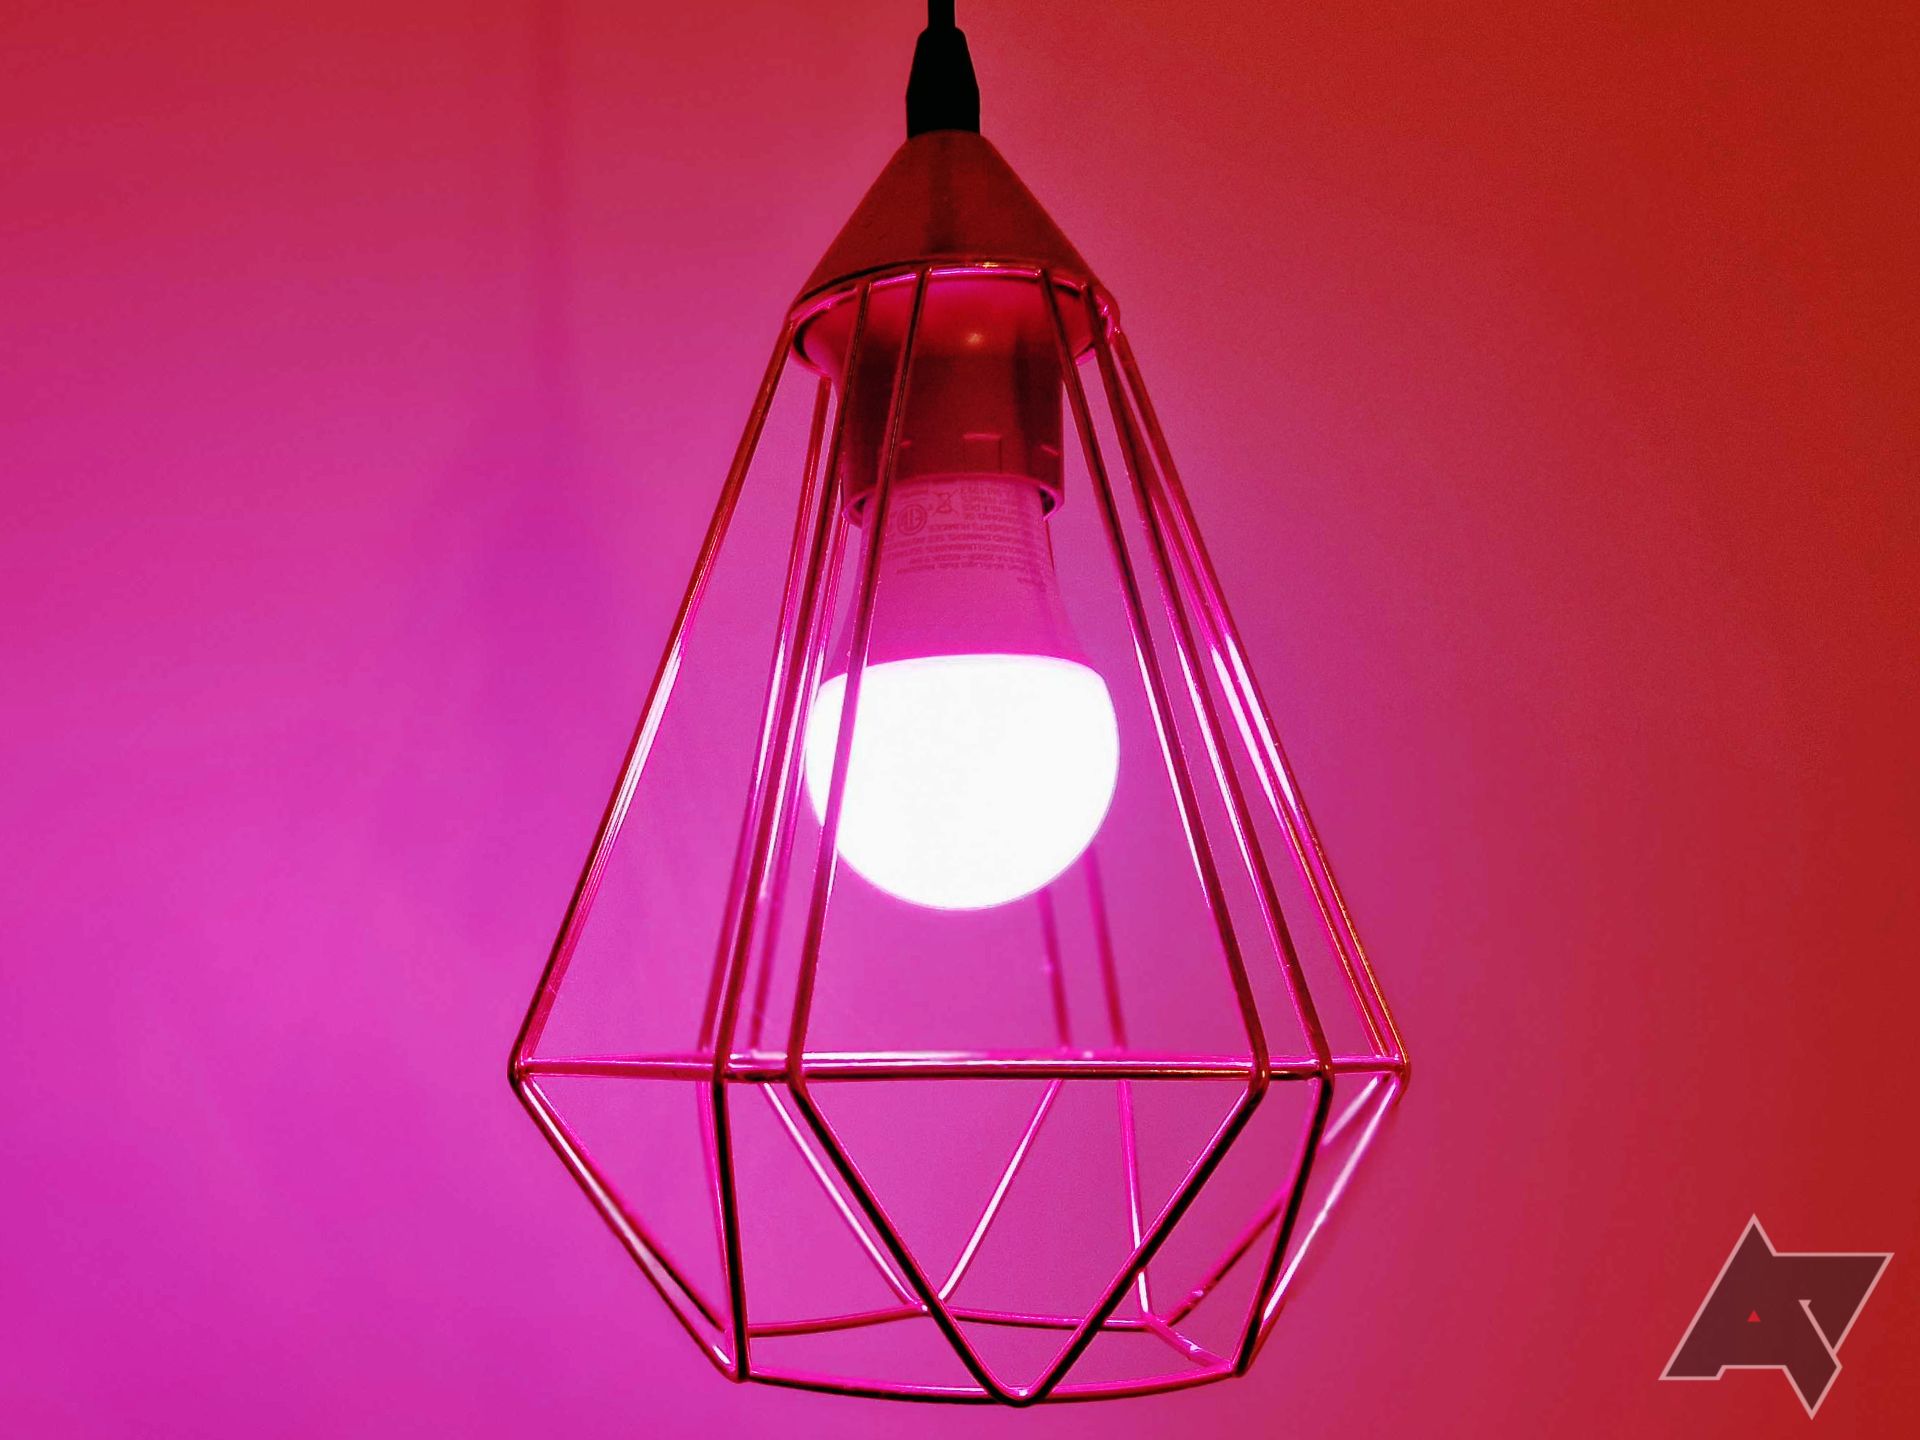 Picture showing a TP-Link Tapo smart bulb mounted on a hanging light fixture in emitting a purple hue